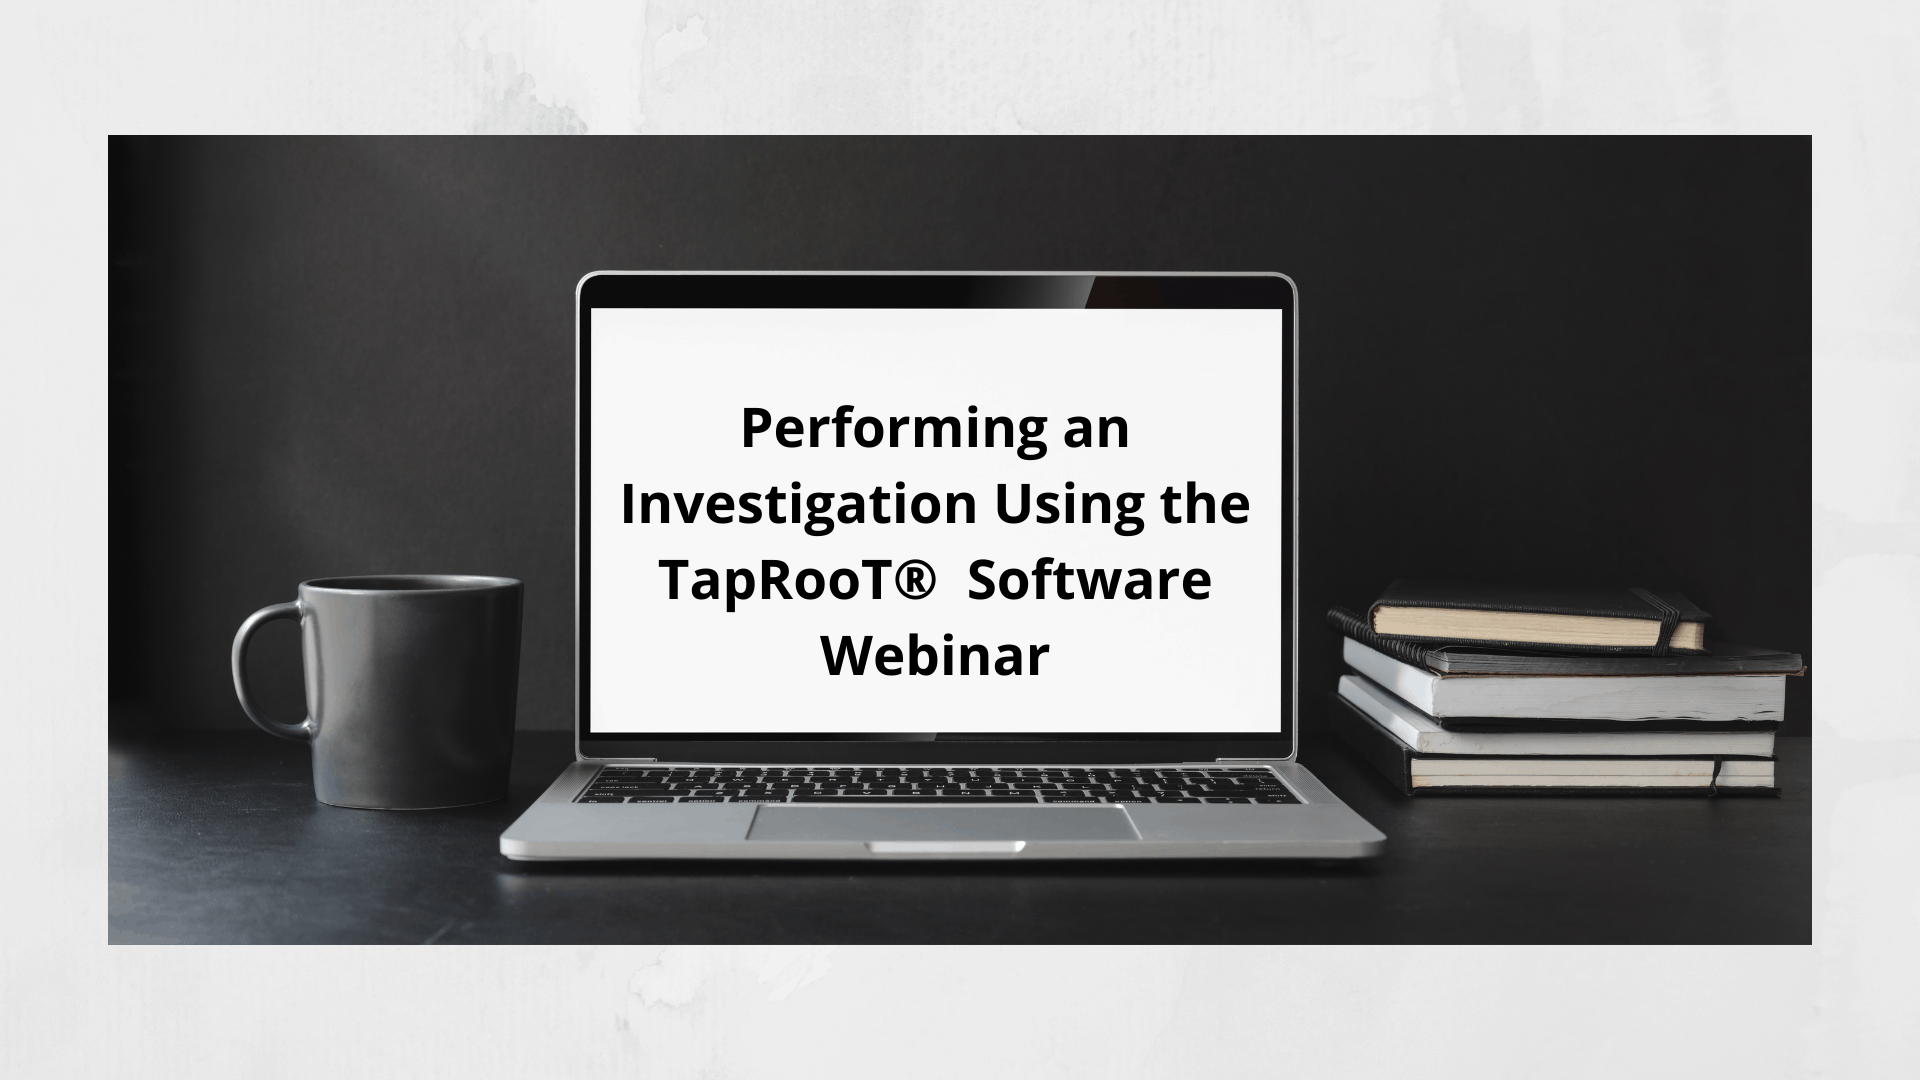 Performing an Investigation Using the TapRooT® Software Webinar